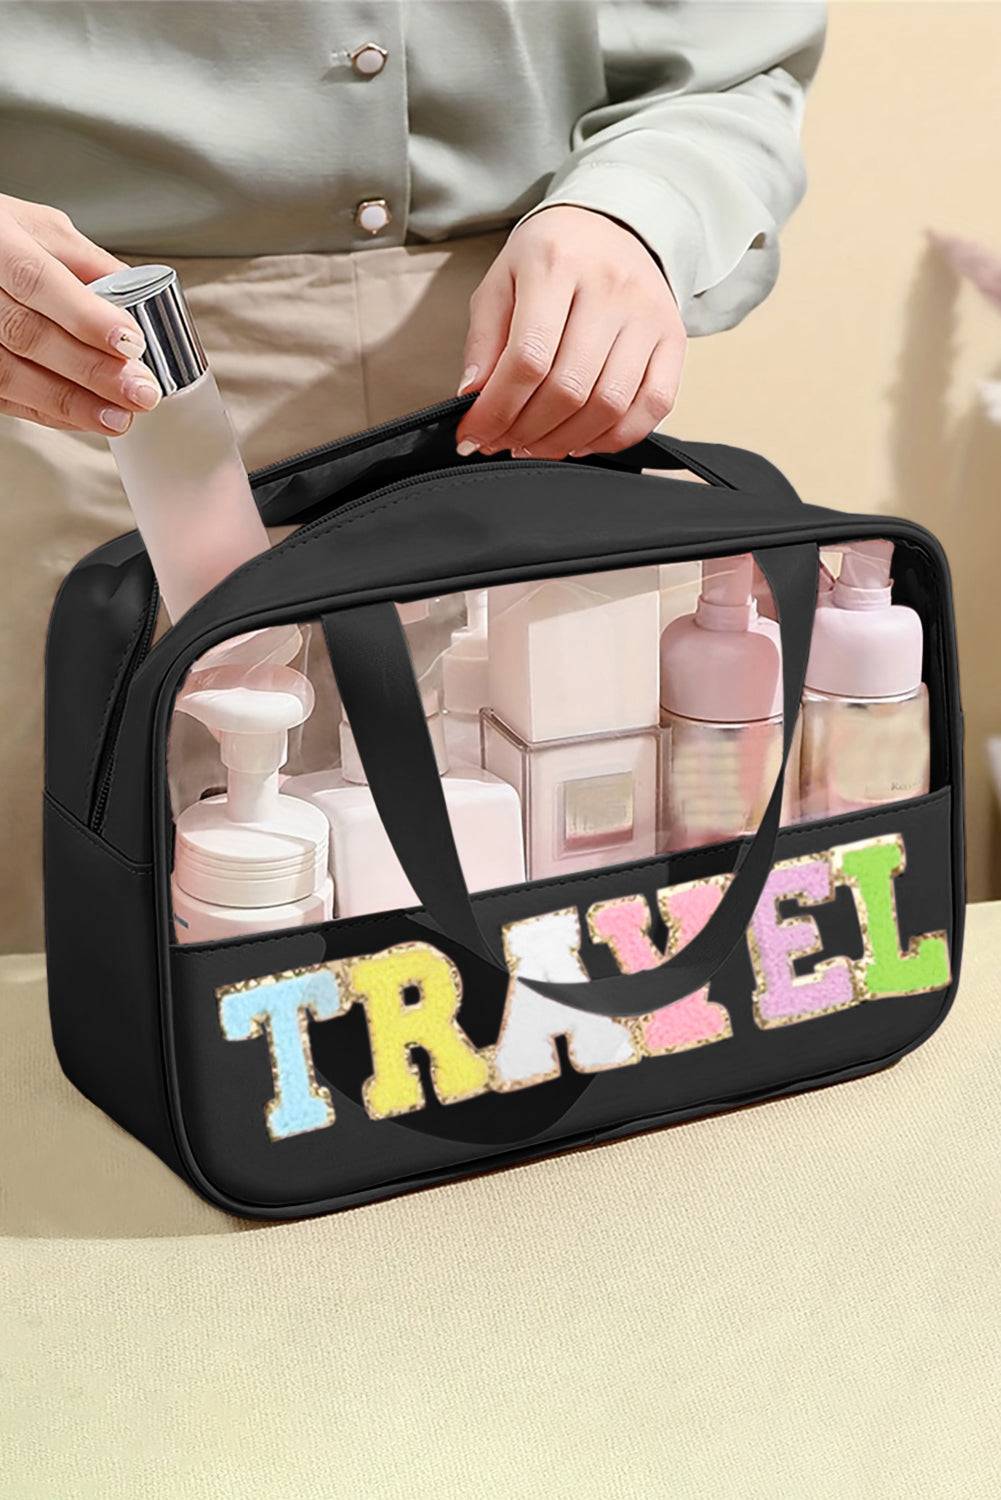 a woman is holding a travel bag filled with personal care products